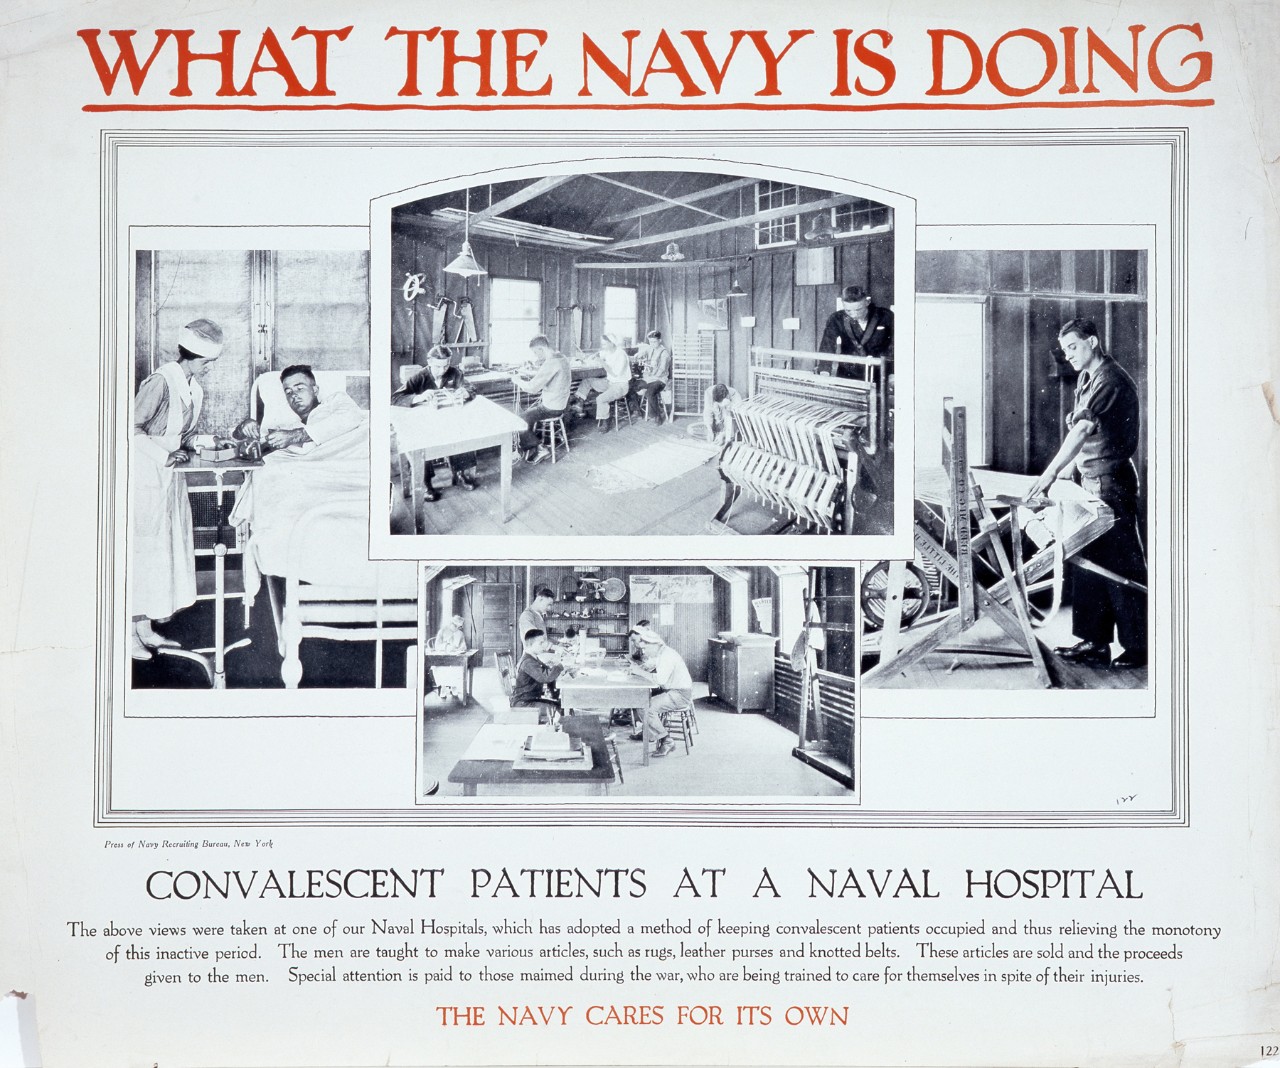 What the Navy is doing: Convalescent Patients at a Naval Hospital. The above view where taken at one of our Naval Hospitals, which has adopted  a method of keeping convalescent patients occupied and thus relieving monotony of this inactive period.  The men are taught to make various articles, such as rugs, leather purses and knotted belts. The articles are sold and the proceeds given to the men. Special attention is paid to those maimed during the war, who are being trained to care for themselves in spite of their injuries. The Navy cares for its own. There are four photographs showing men working at various projects 